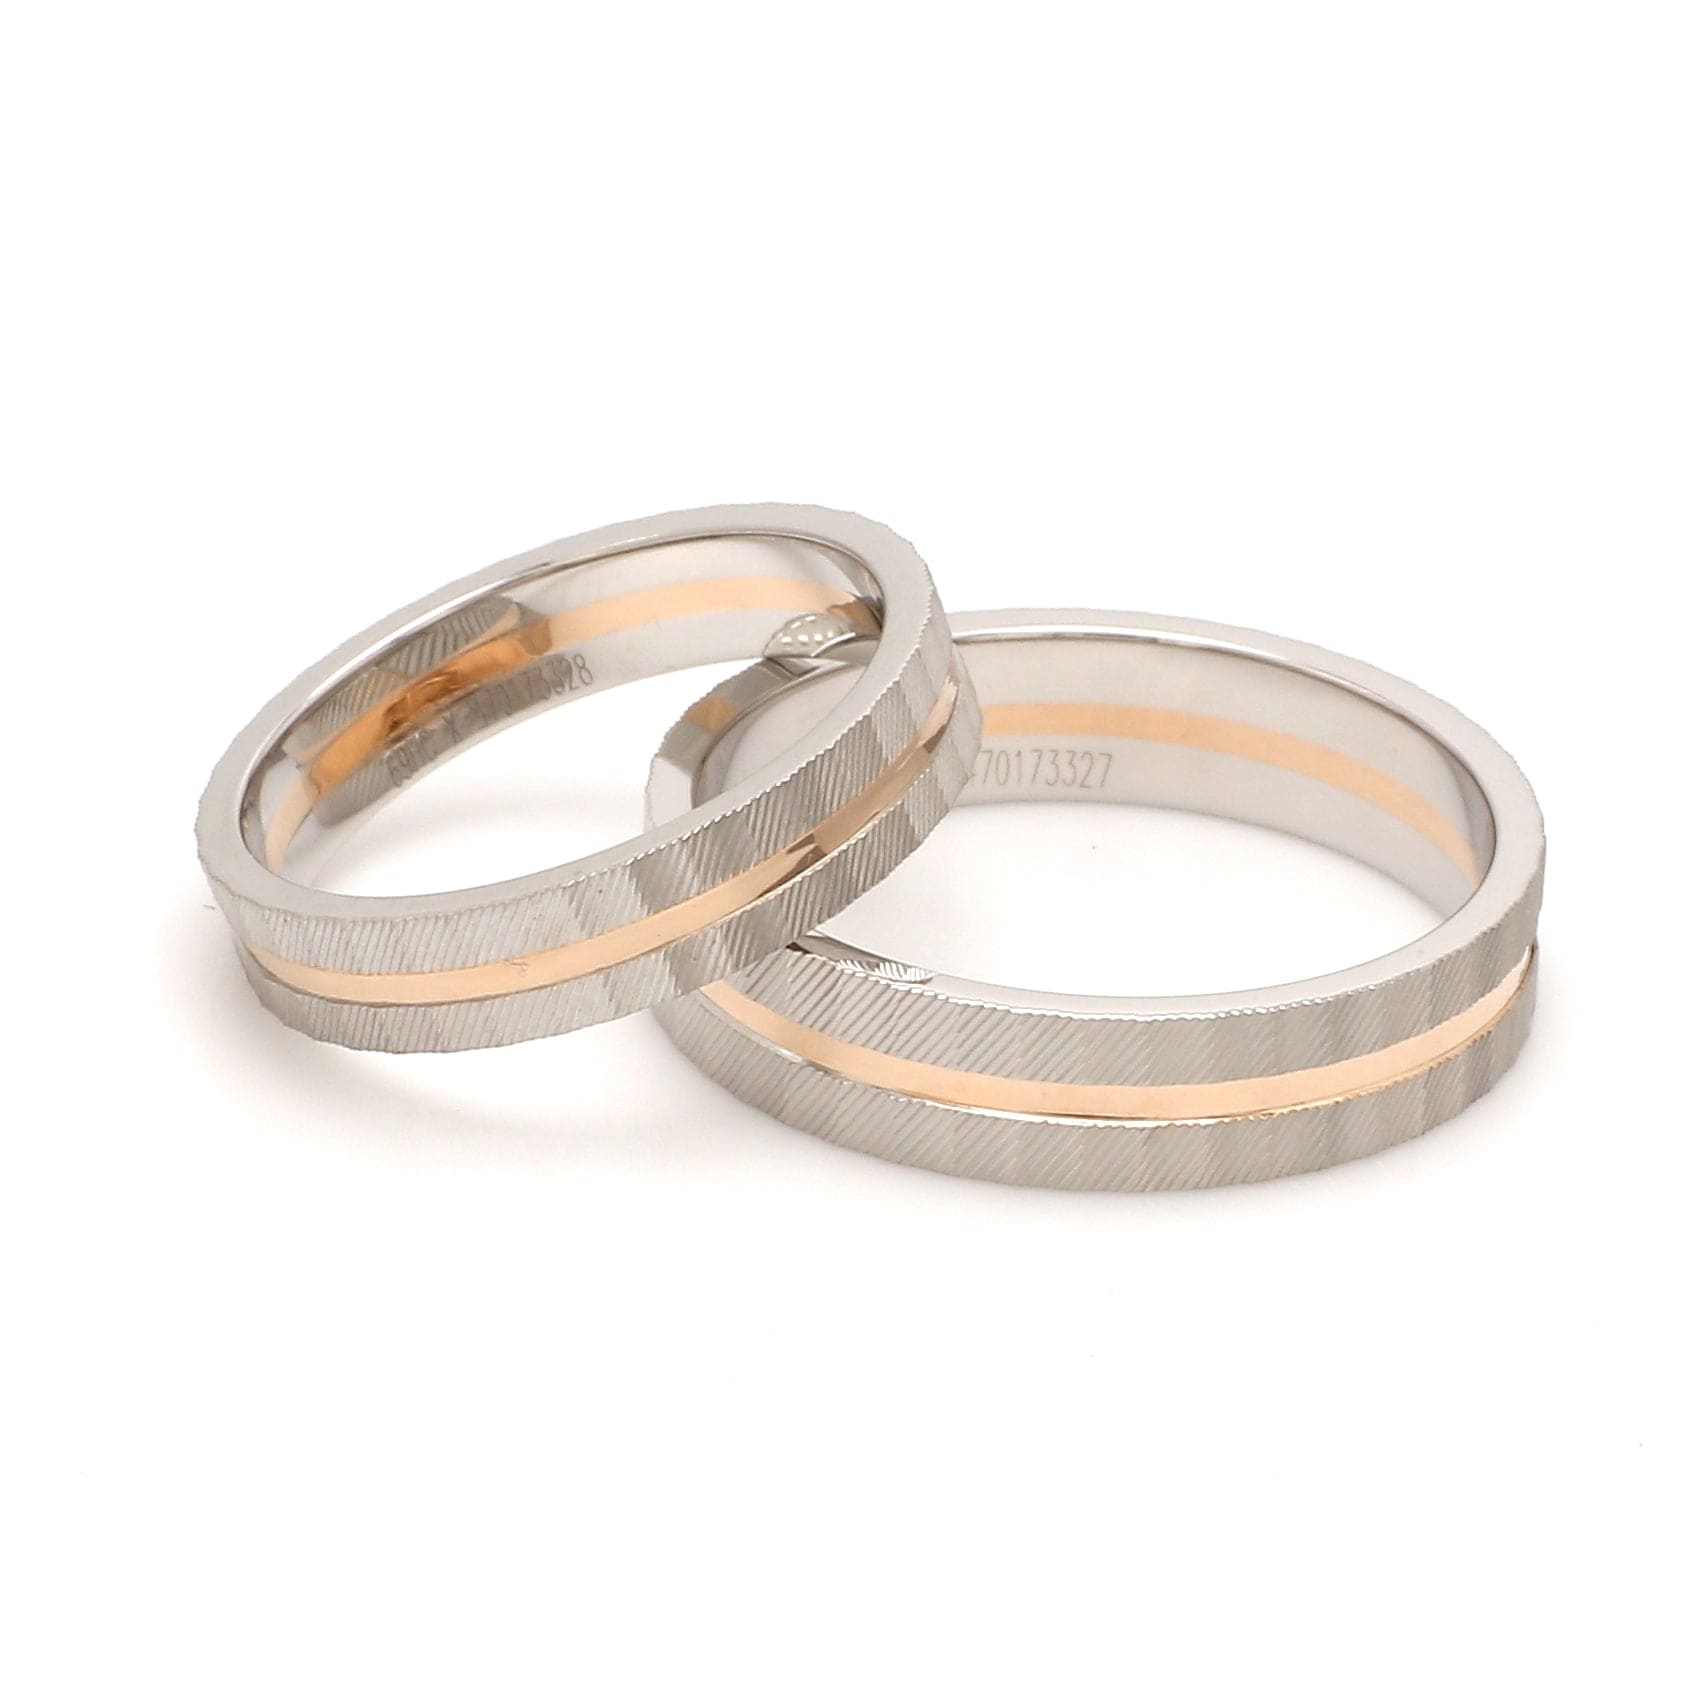 𝗗𝗜𝗗 𝗬𝗢𝗨 𝗞𝗡𝗢𝗪 that these modern yellow gold wedding bands are a  product of 